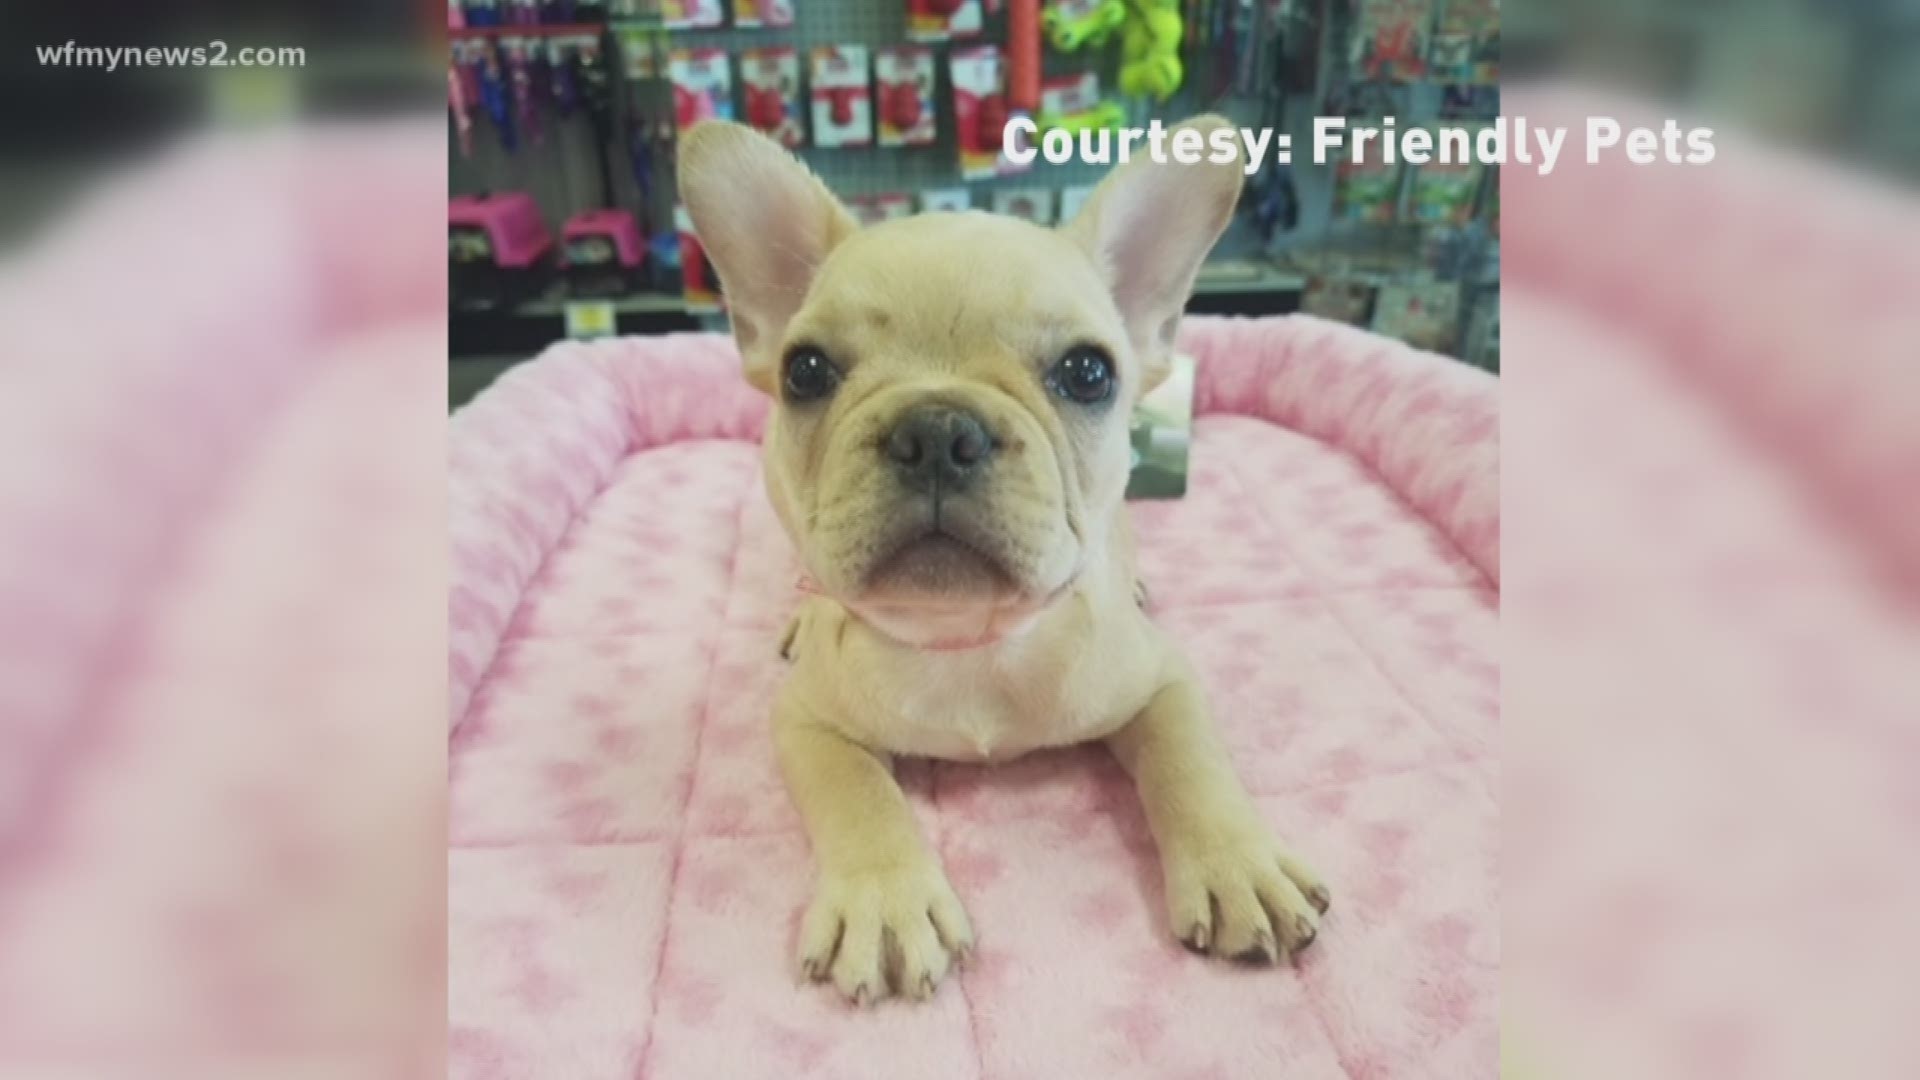 Greensboro Police say a 2-month-old female French bulldog puppy was stolen from the Friendly Pets store in Friendly Center Friday night. The store says the puppy is valued at $4,500 and is micro-chipped.